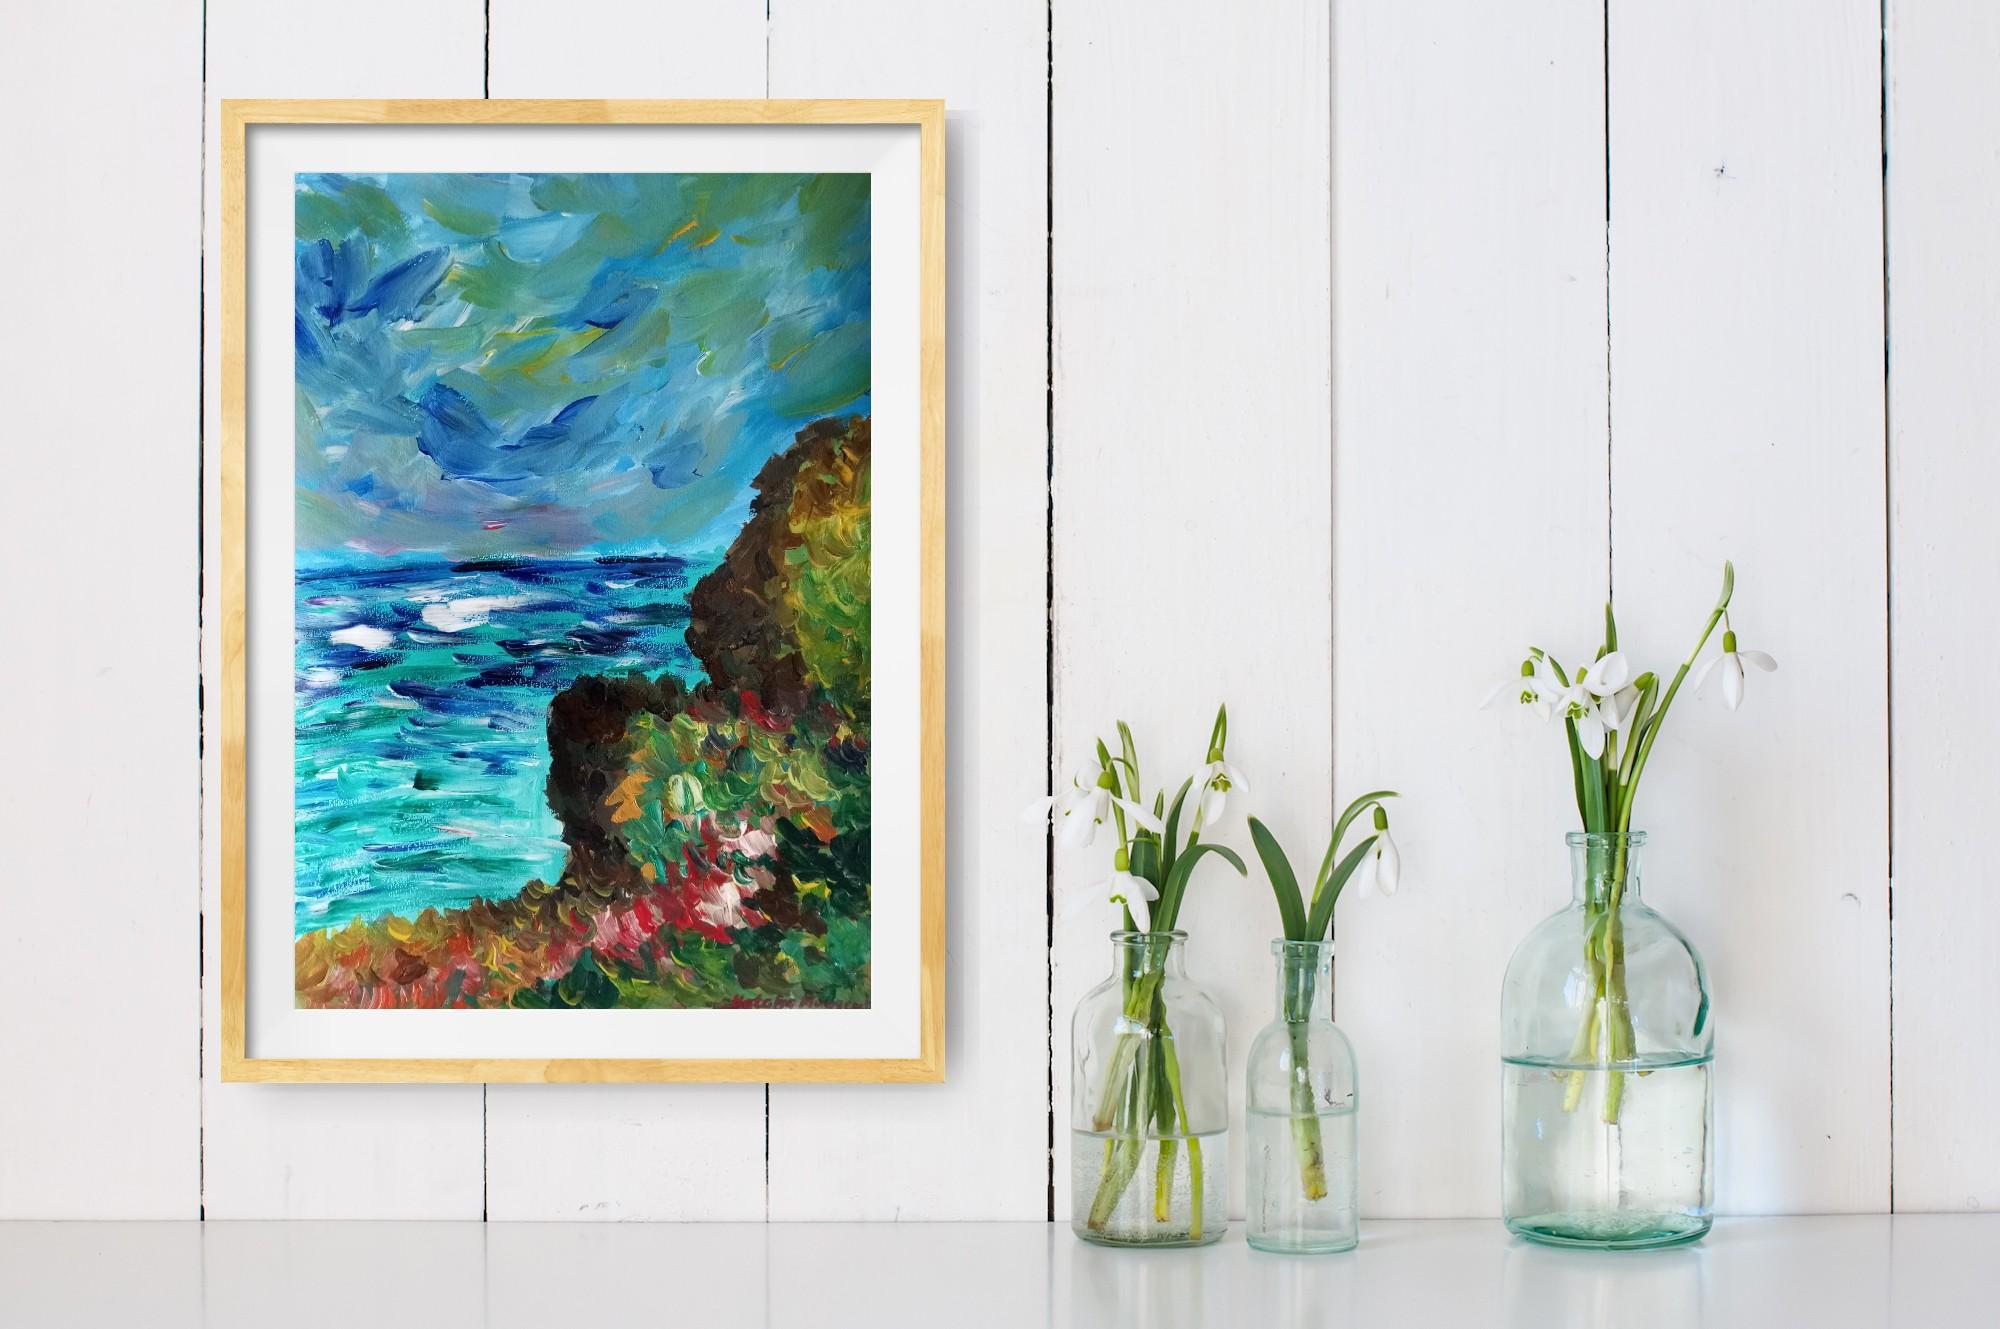 I enjoy working on semi-abstract artworks with a touch of impressionism.
This is the one of the artworks which was inspired by the beauty of the south of France and in particularly, by Provence region. I was certainly inspired by the paintings of